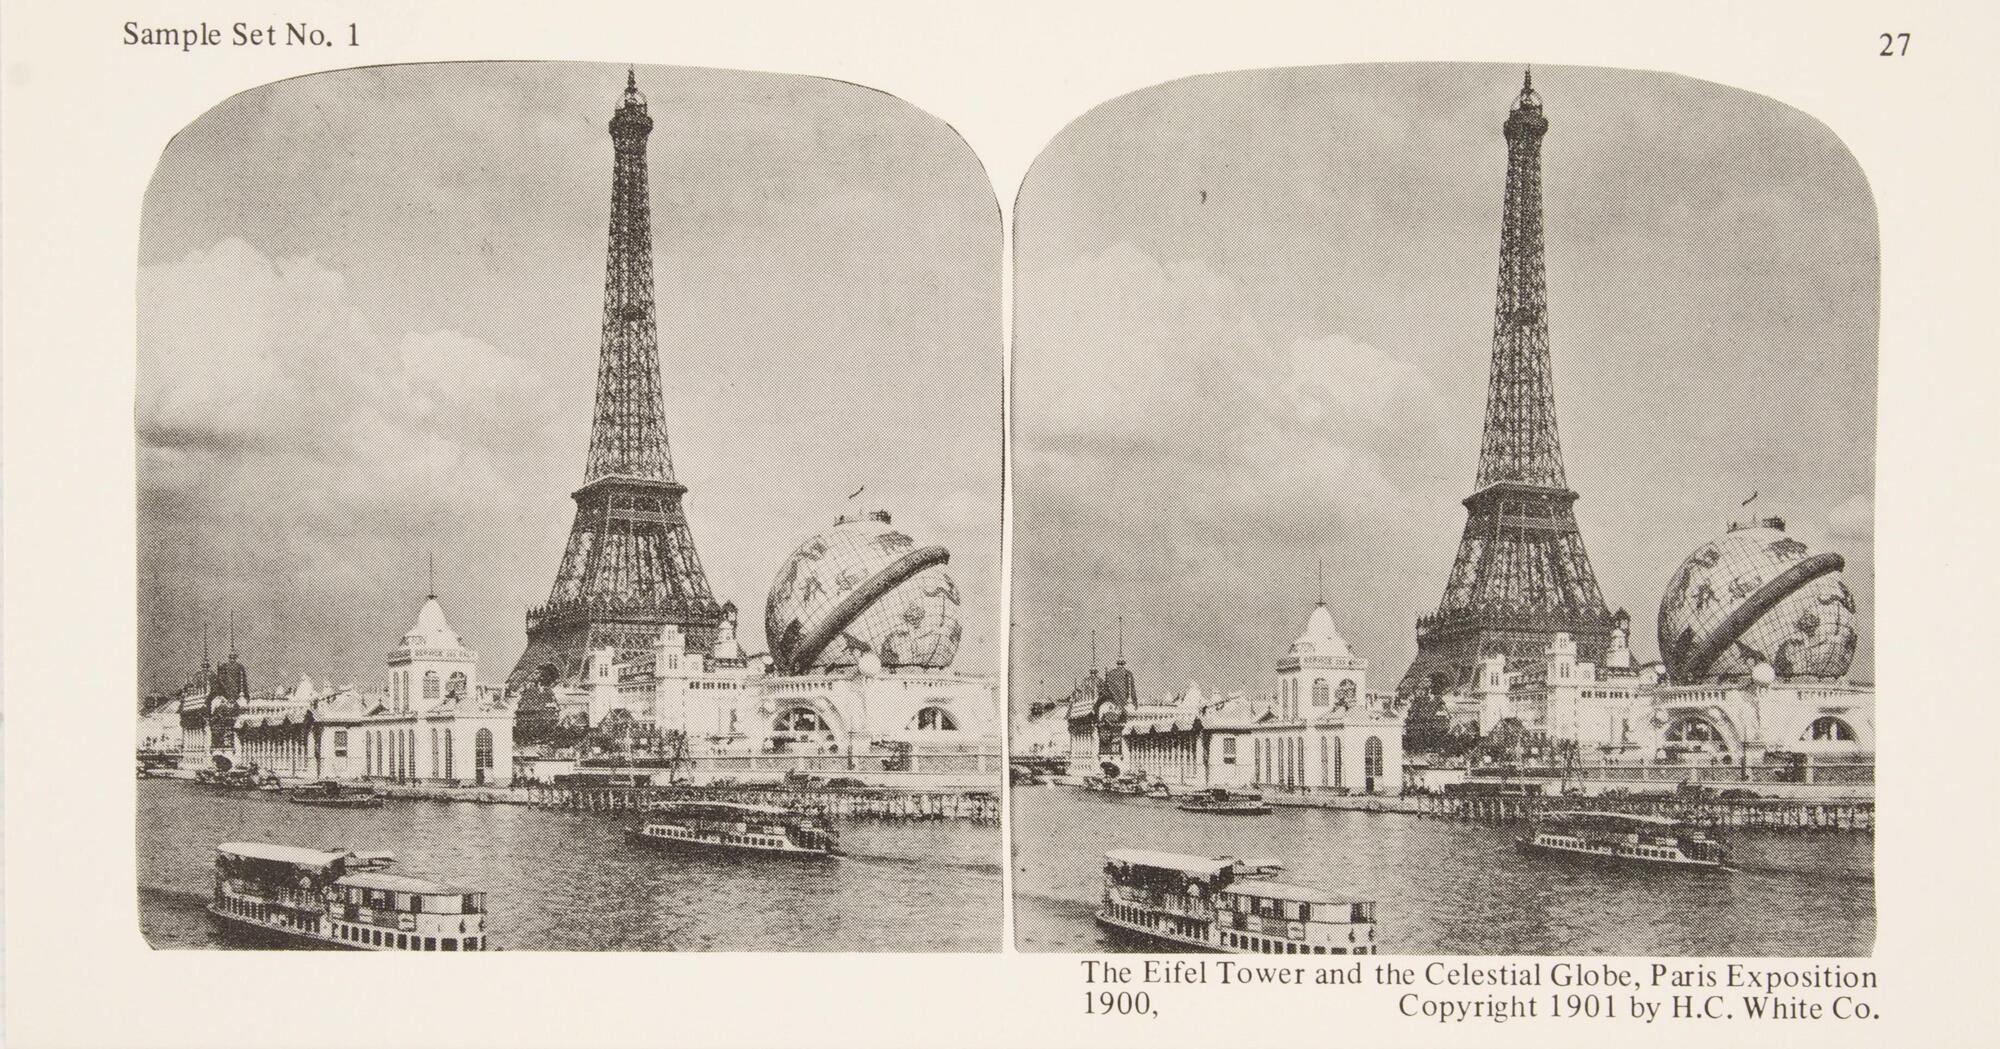 This black and white stereoscopic image features two images showing the Seine River in Paris. There are sightseeing boats on the river and on the opposite bank, a view of the Eiffel Tower and a large globe amidst some white buildings. It is surrounded by the text: Sample Set No. 1; The Eifel Tower and the Celestial Globe, Paris Exposition 1900, Copyright 1901 by H. C. White Co. <br />